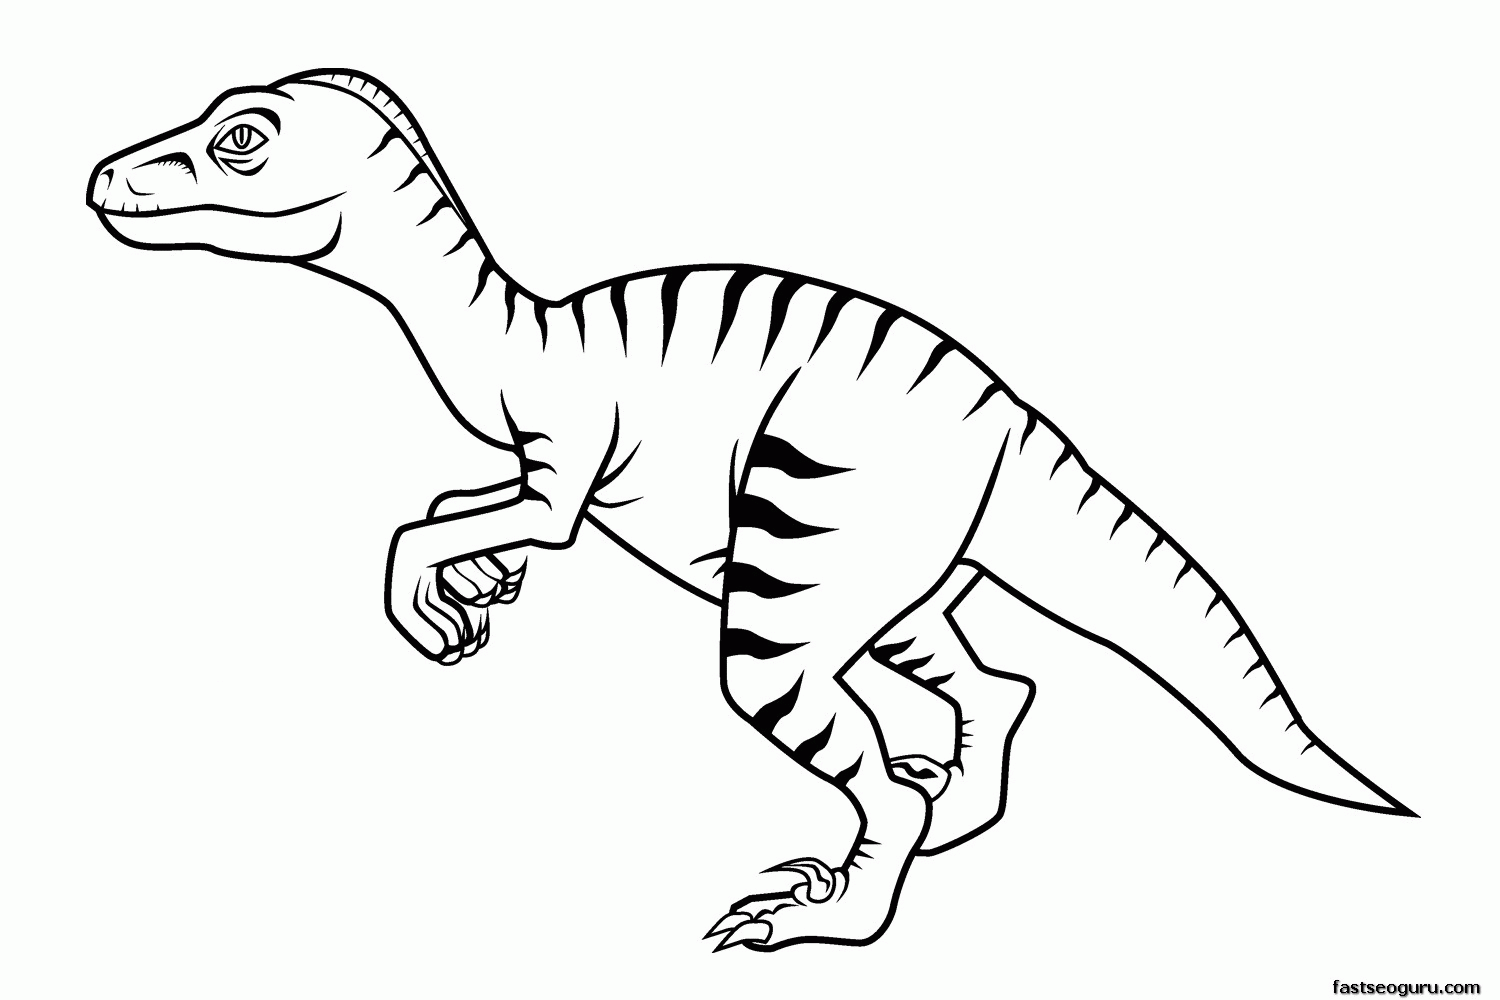 Simple Dinosaur Coloring Pages - Coloring Home